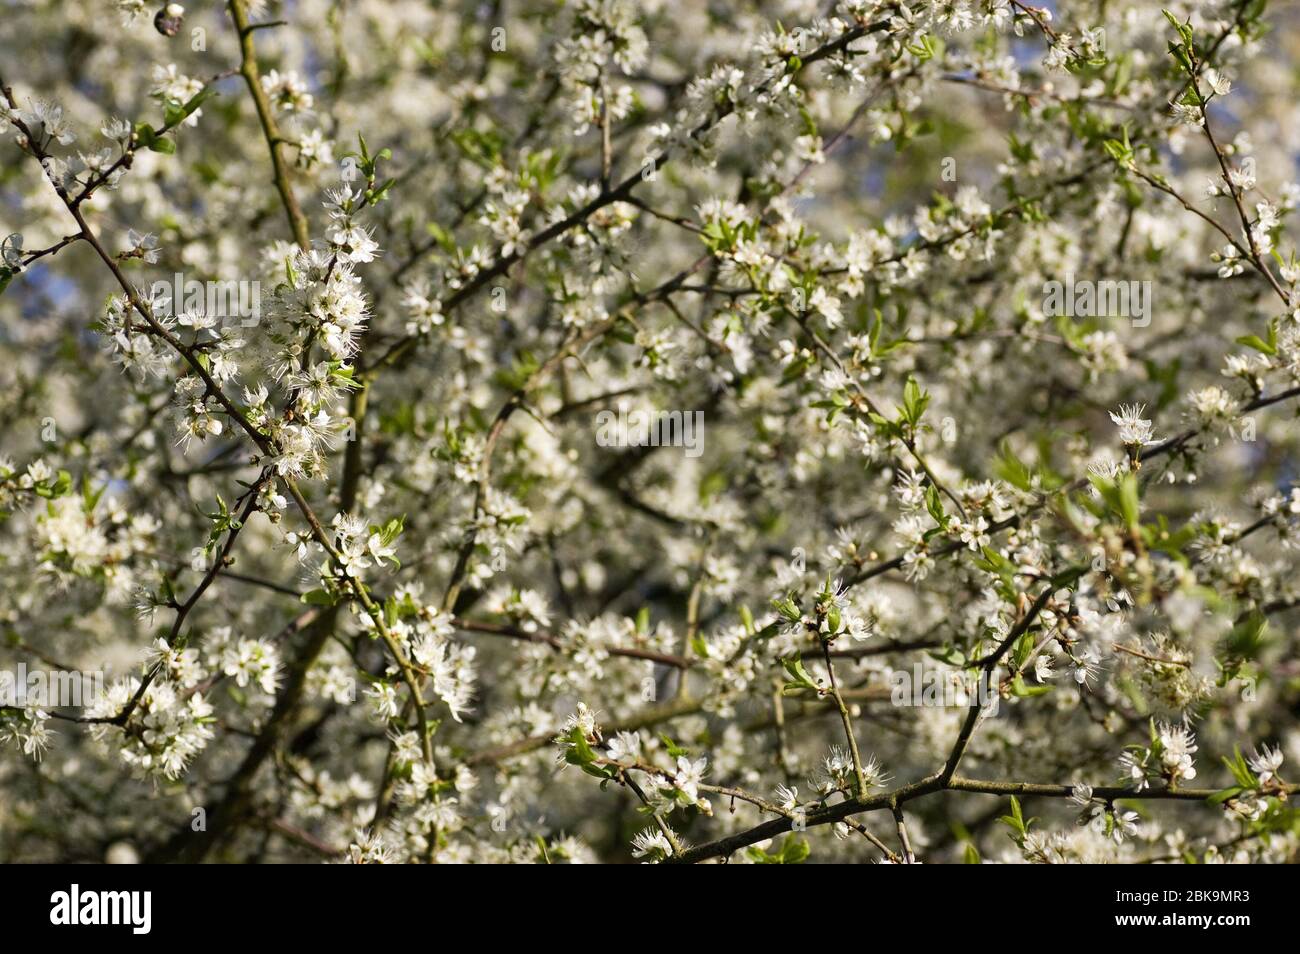 Spring blossom on a May tree hedgerow. Stock Photo